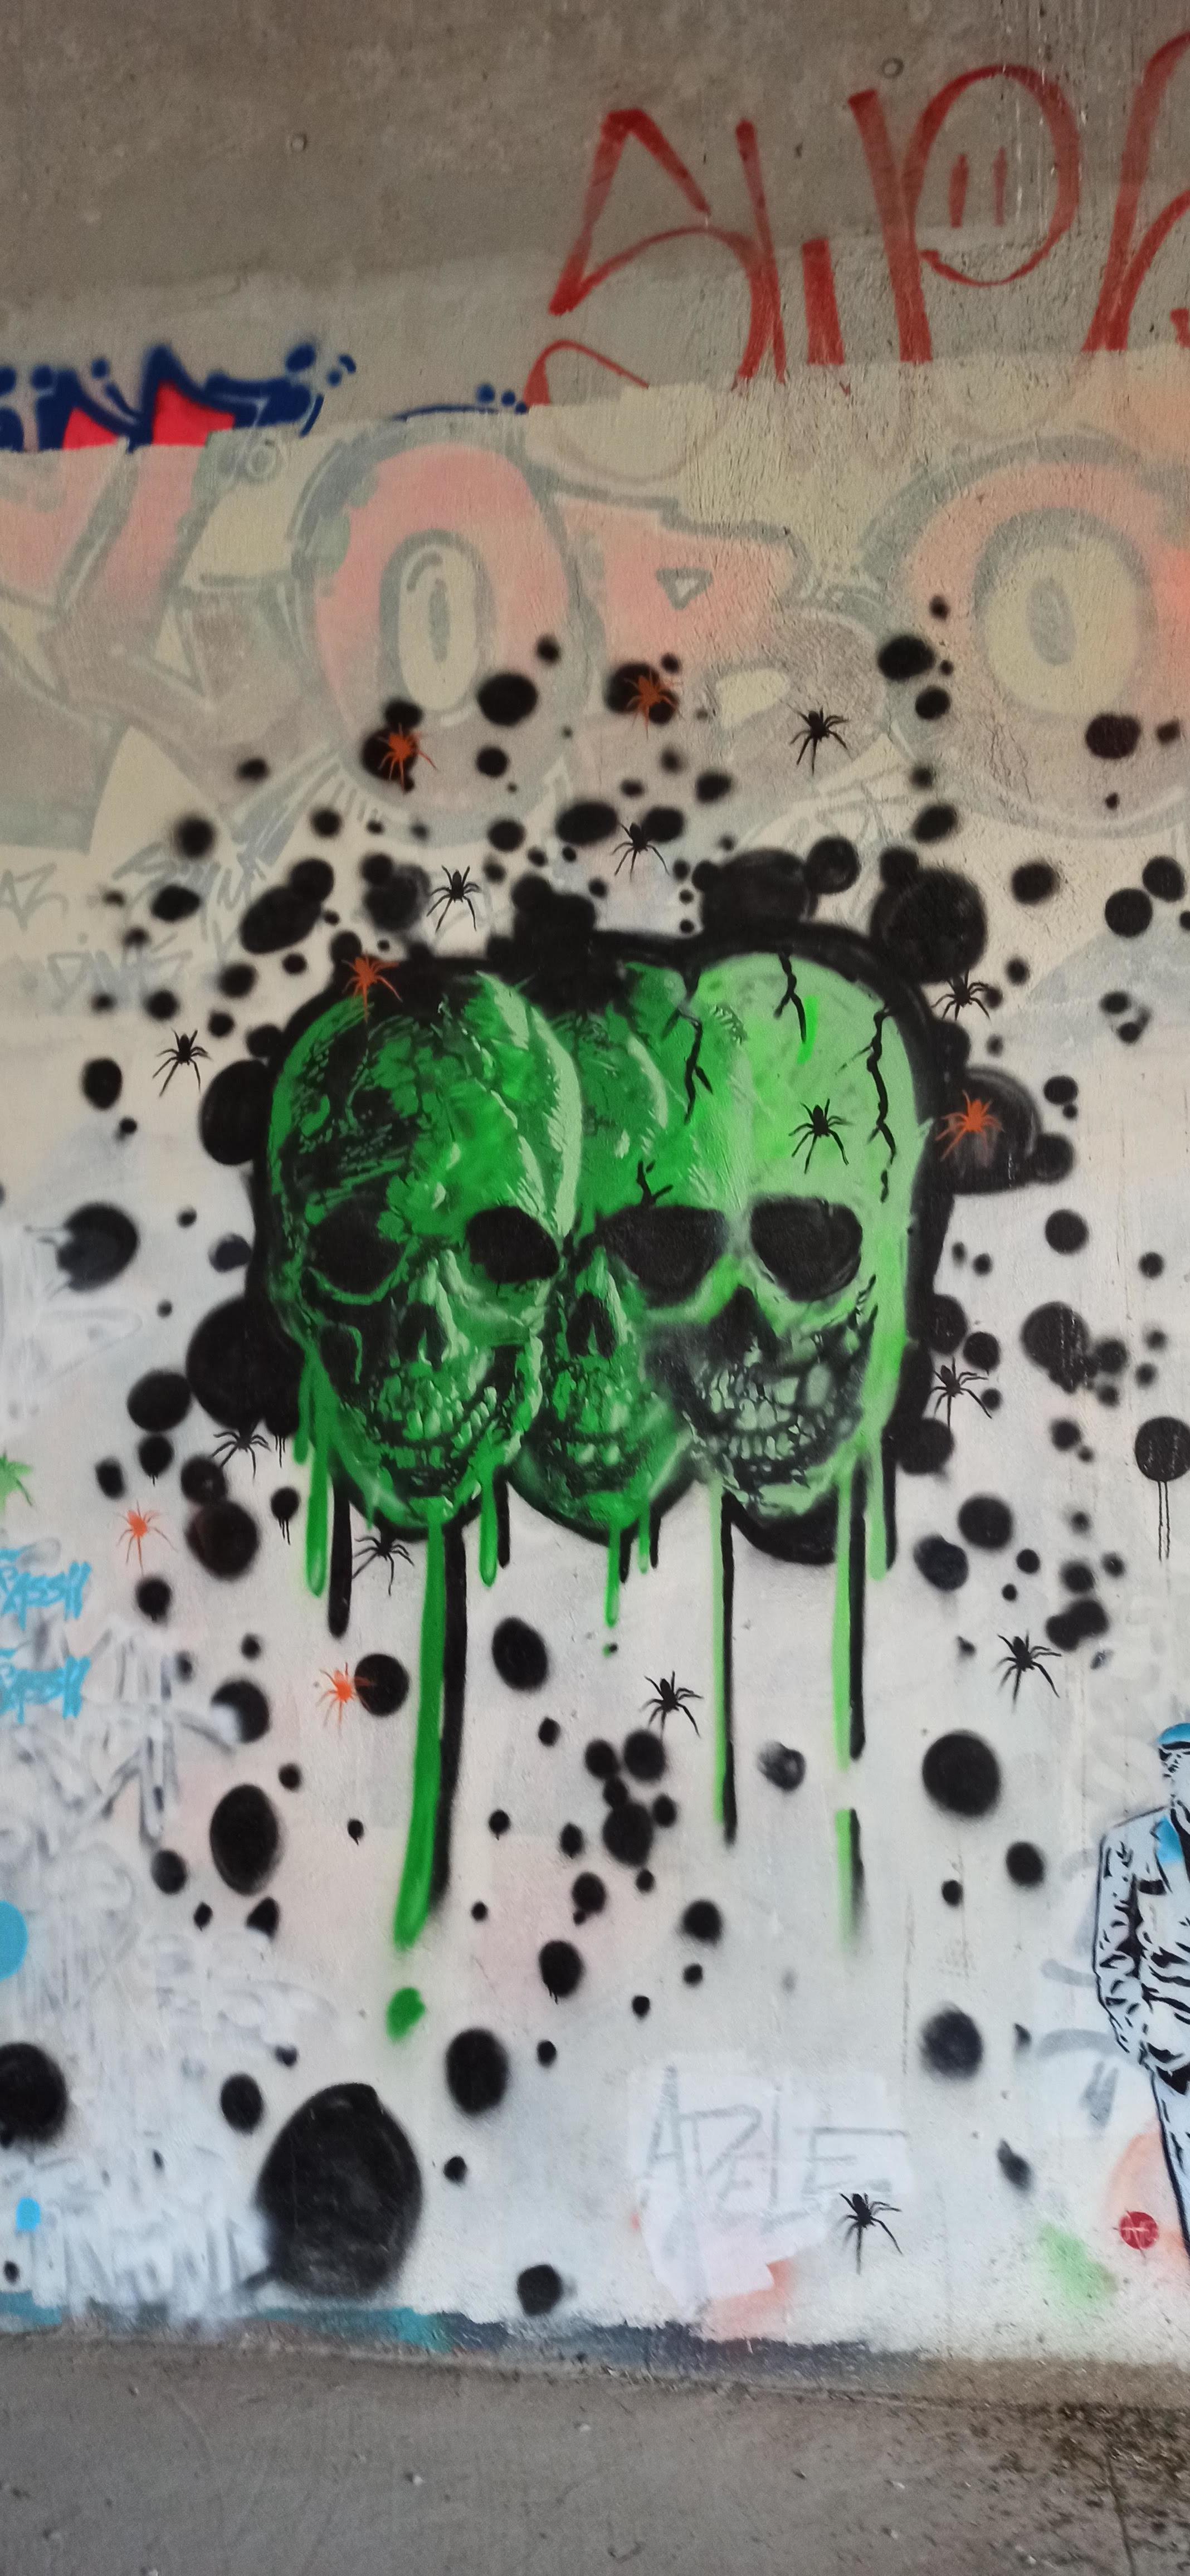 Graffiti 5490  captured by Rabot in Paris France